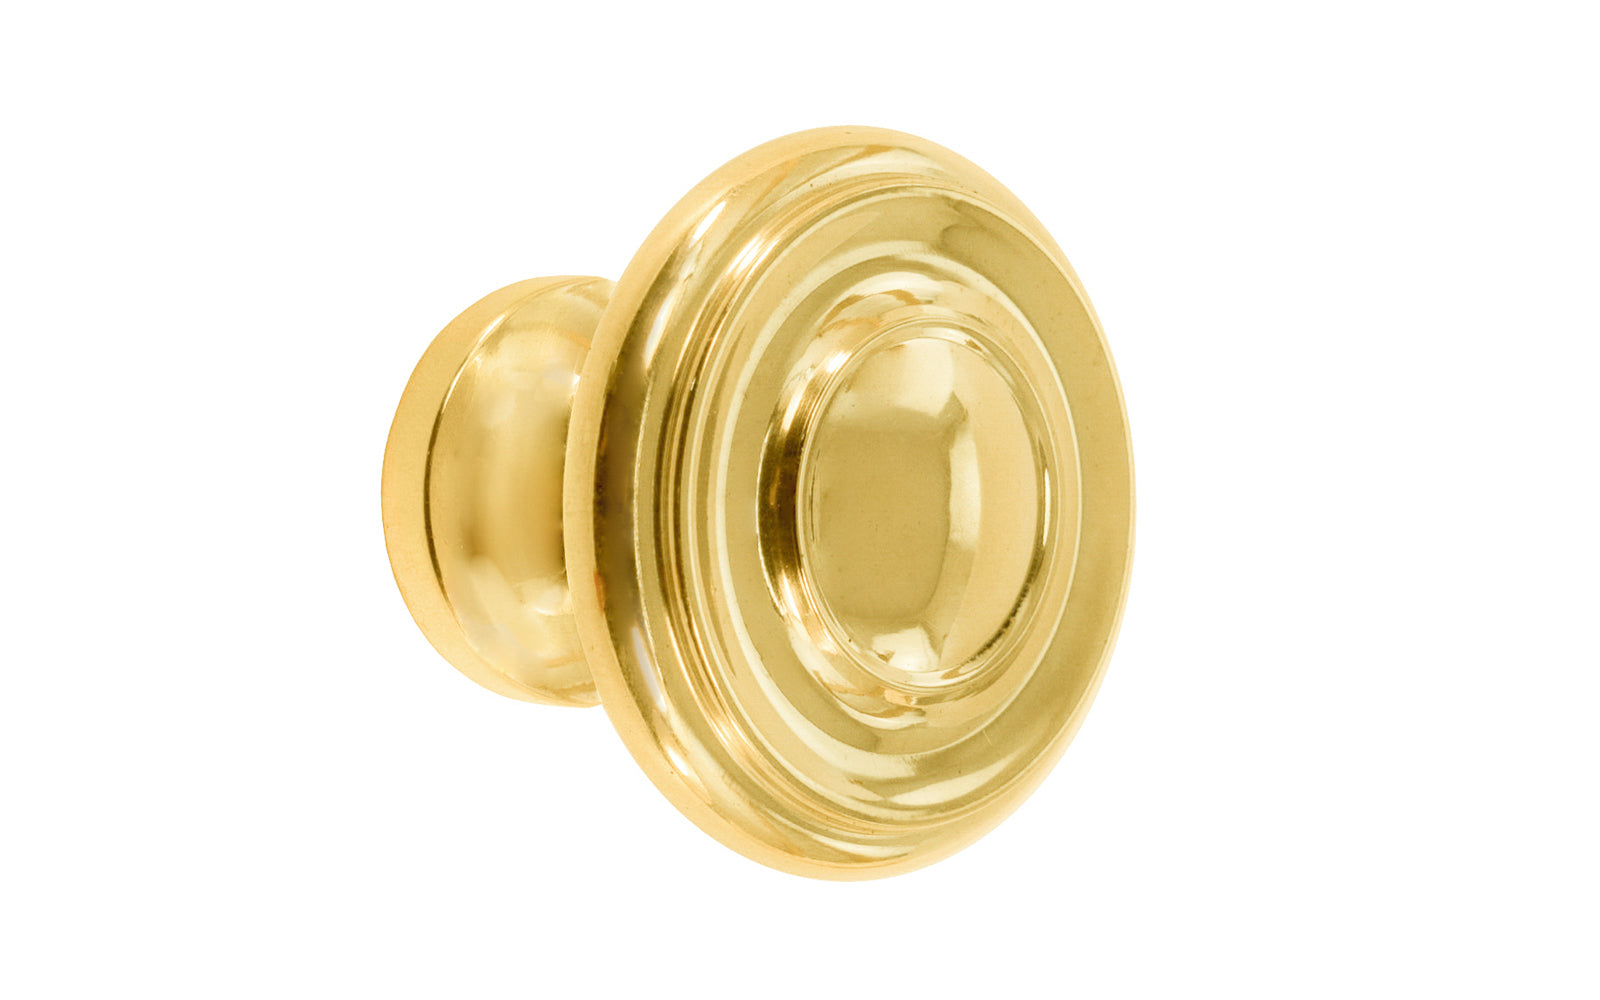 Vintage-style Hardware · Solid Brass classic contemporary / art deco, mid-century style cabinet knob. High quality solid brass 1-1/4" diameter Knob. Ideal for kitchen & bathroom cabinets, & furniture. Lacquered Brass Finish.